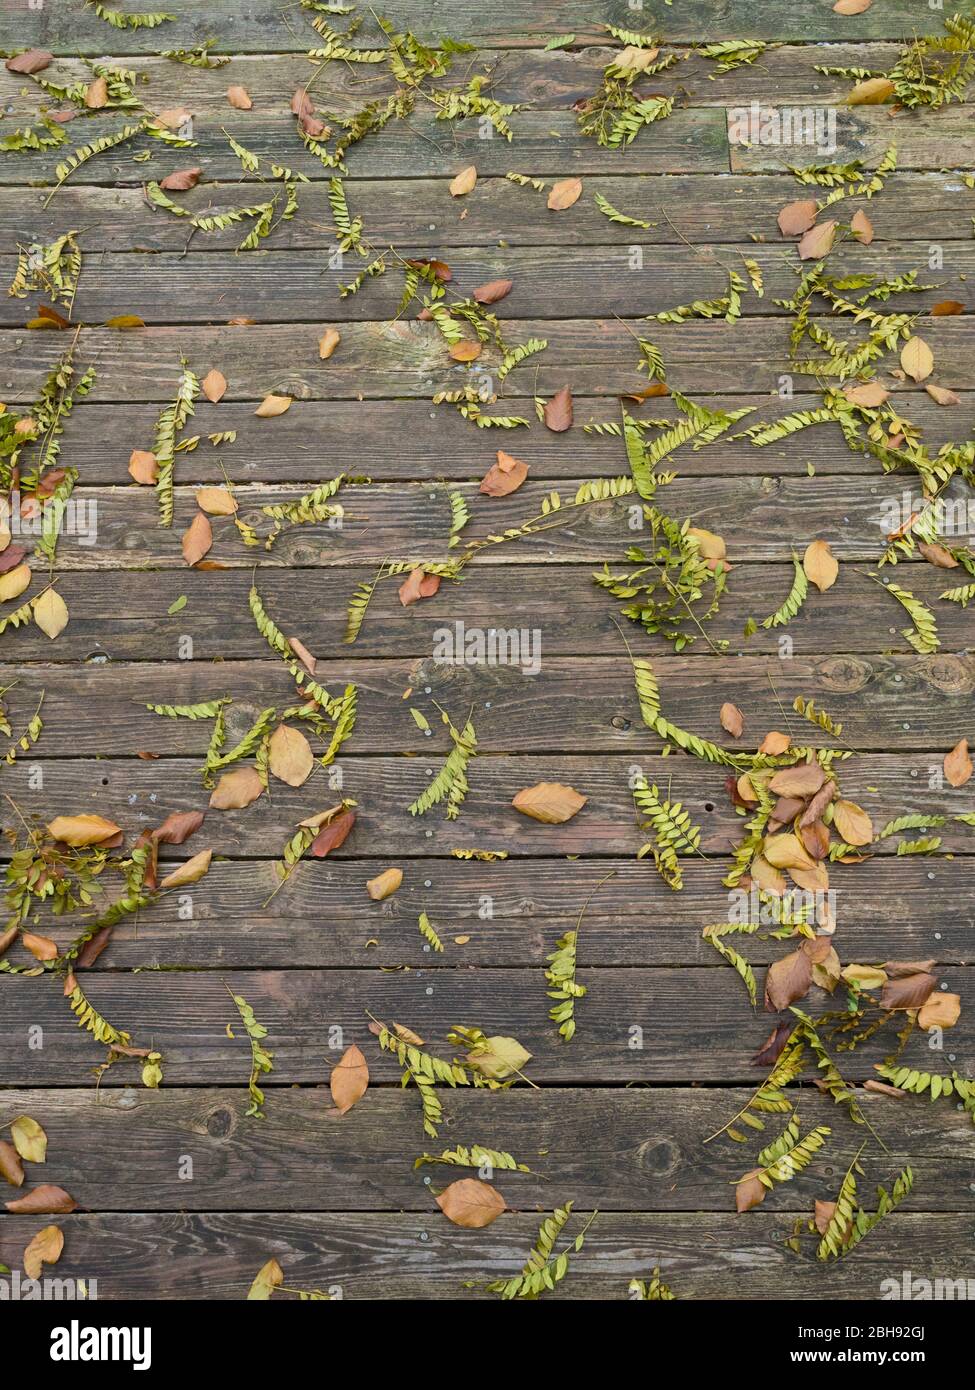 Canada, Ontario, fallen copper beech and ash tree leaves, wooden deck, old, weathered Stock Photo